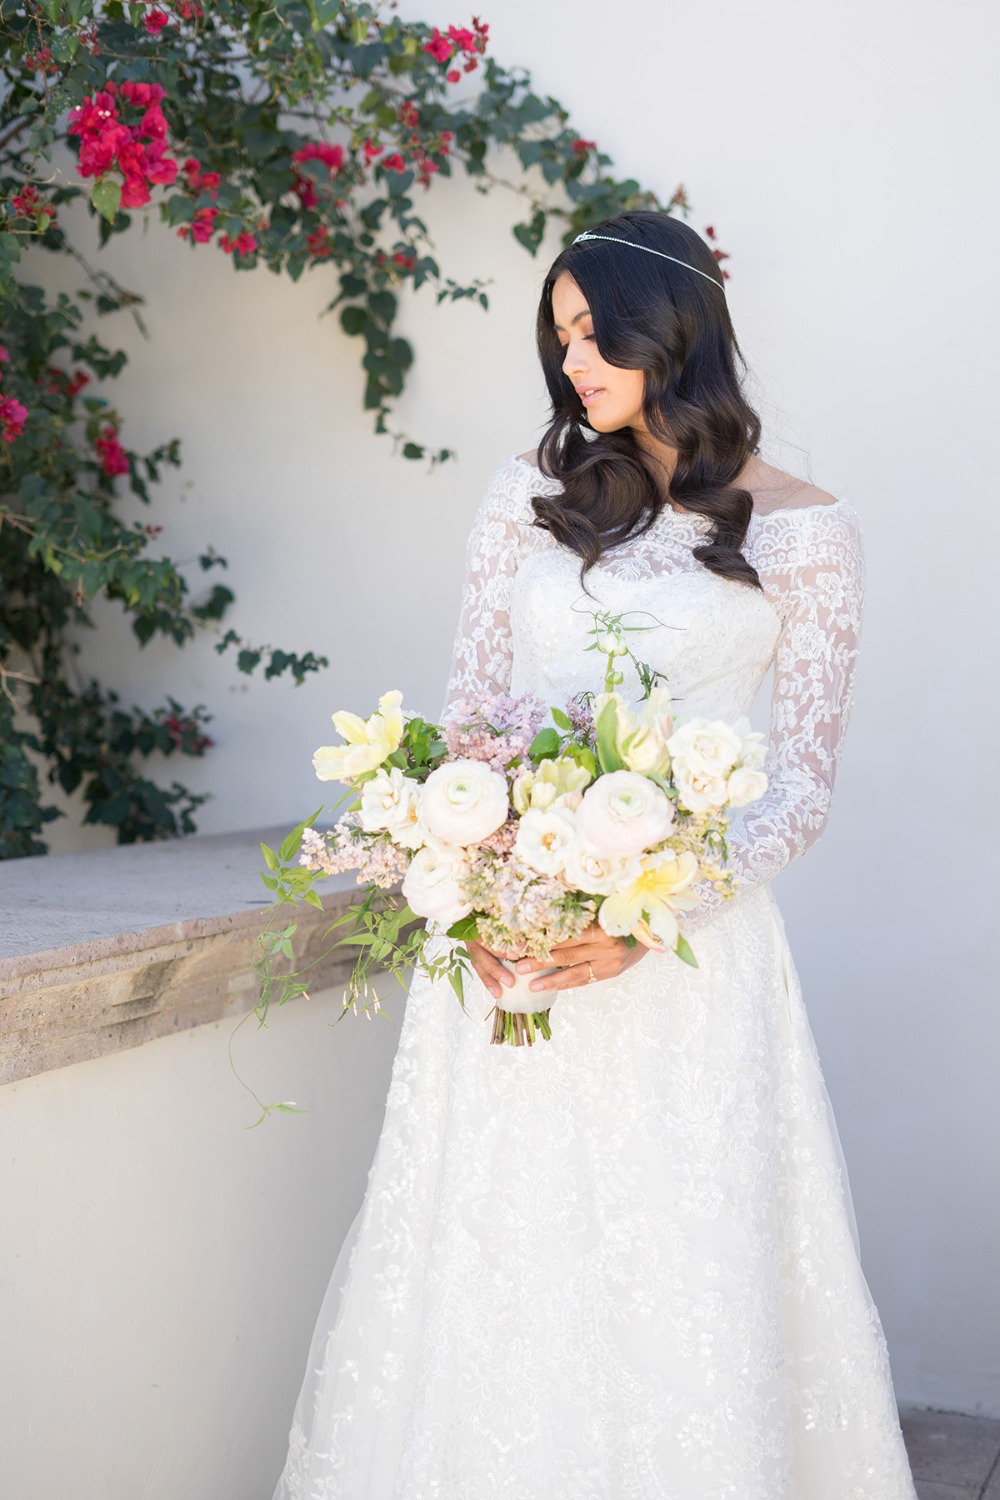 Traditional and Timeless: David's Bridal Wins With Both 